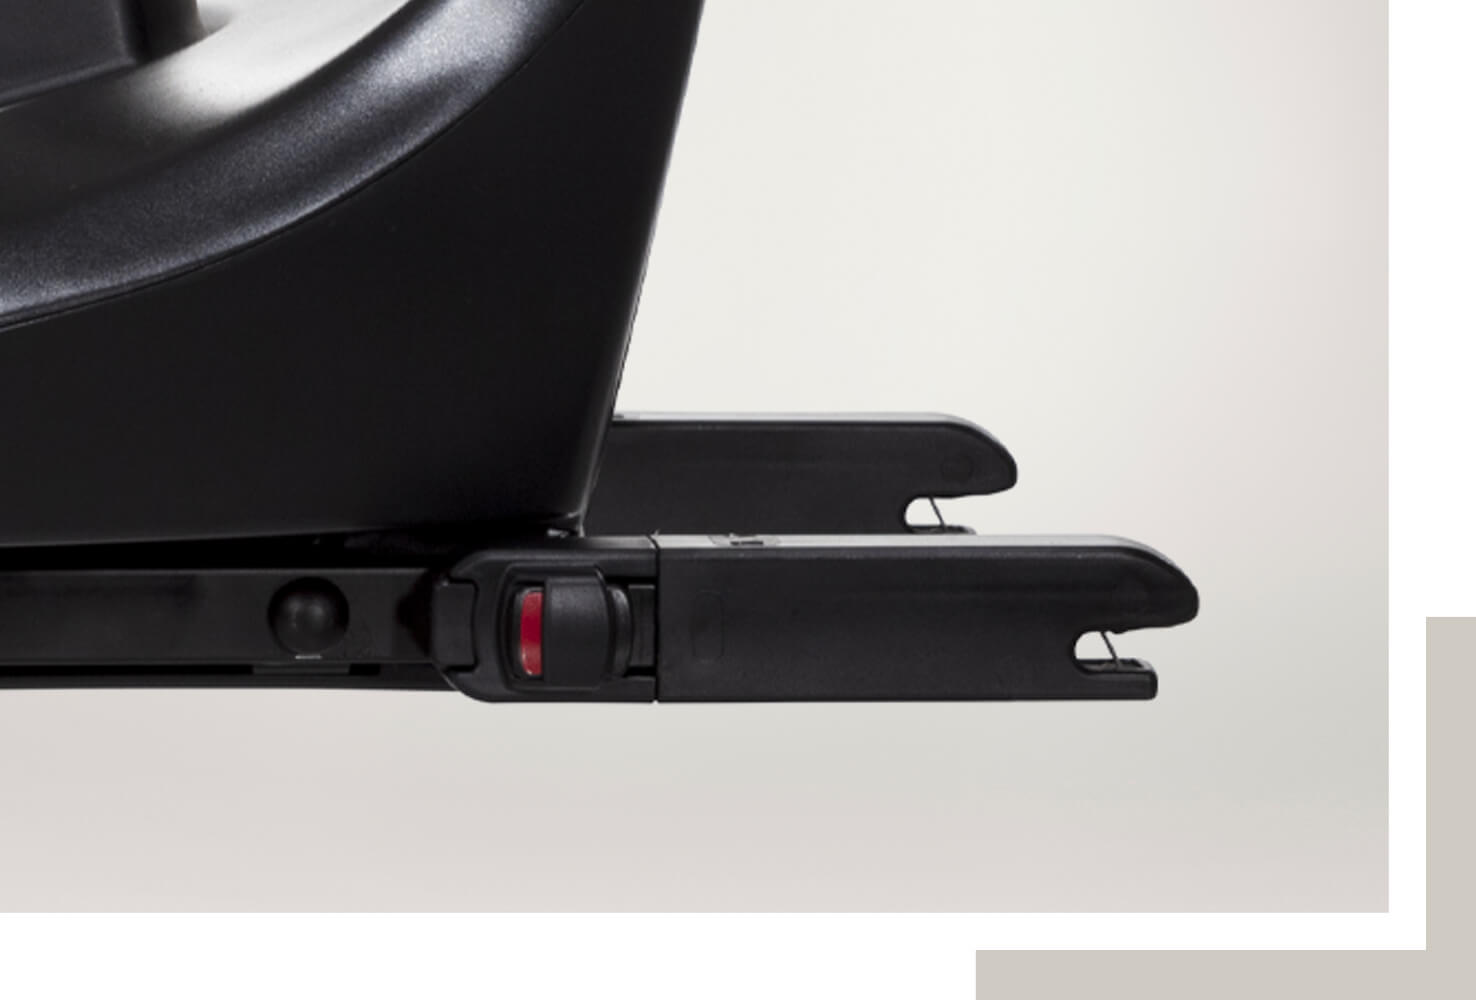  ISOFIX connectors on the I base encore make installation quick and easy